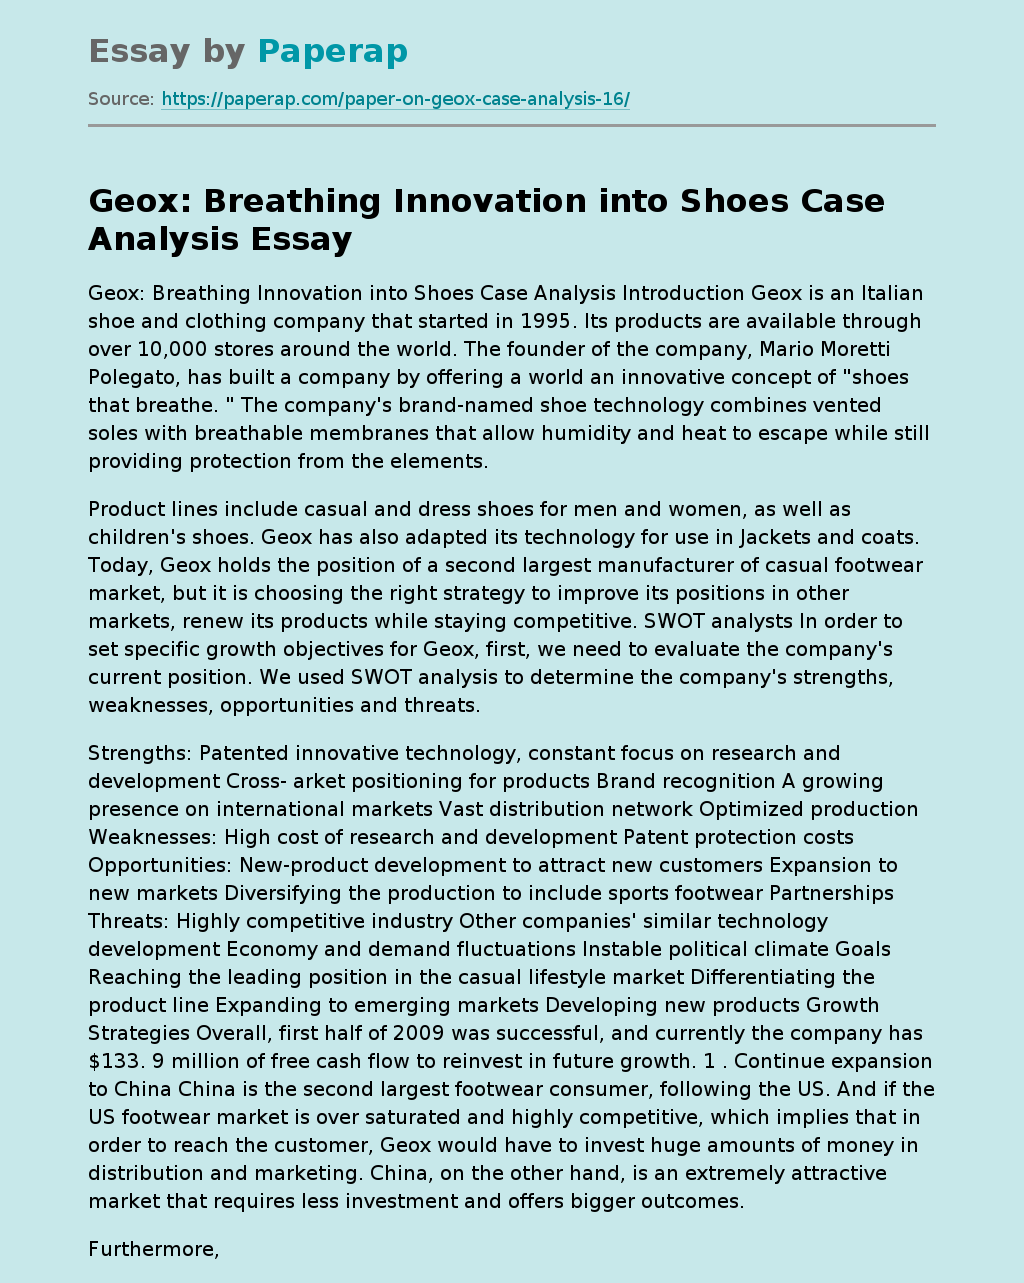 Geox: Breathing Innovation into Shoes Case Analysis